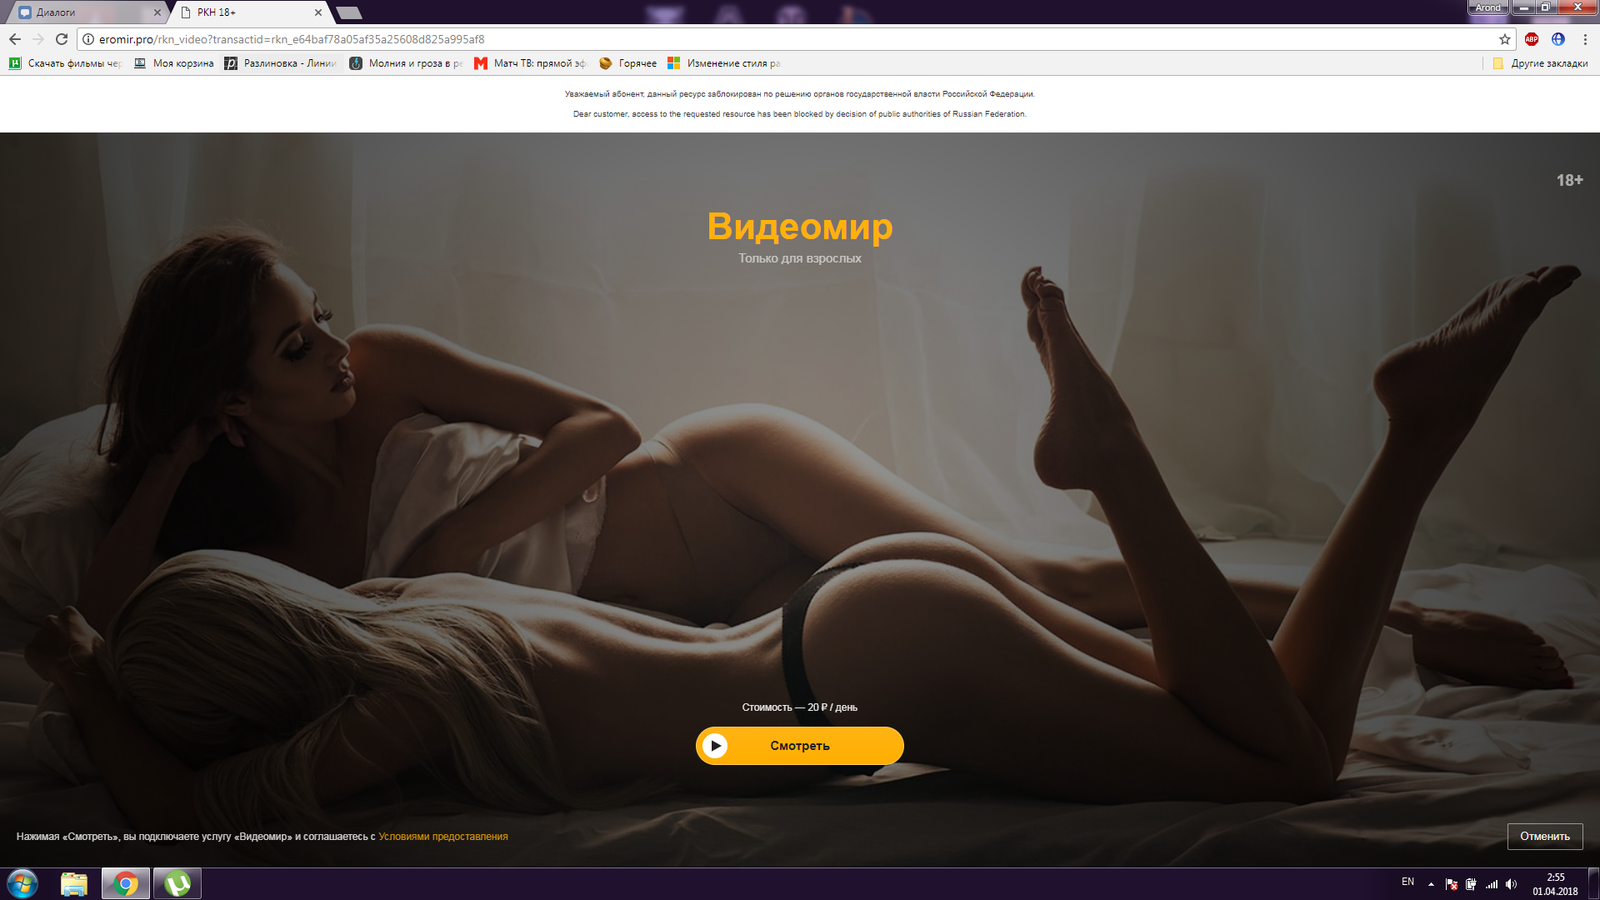 RKN cares about the site with films, but it does not block fucking) - My, Roskomnadzor, Not porn, Screenshot, Blocking